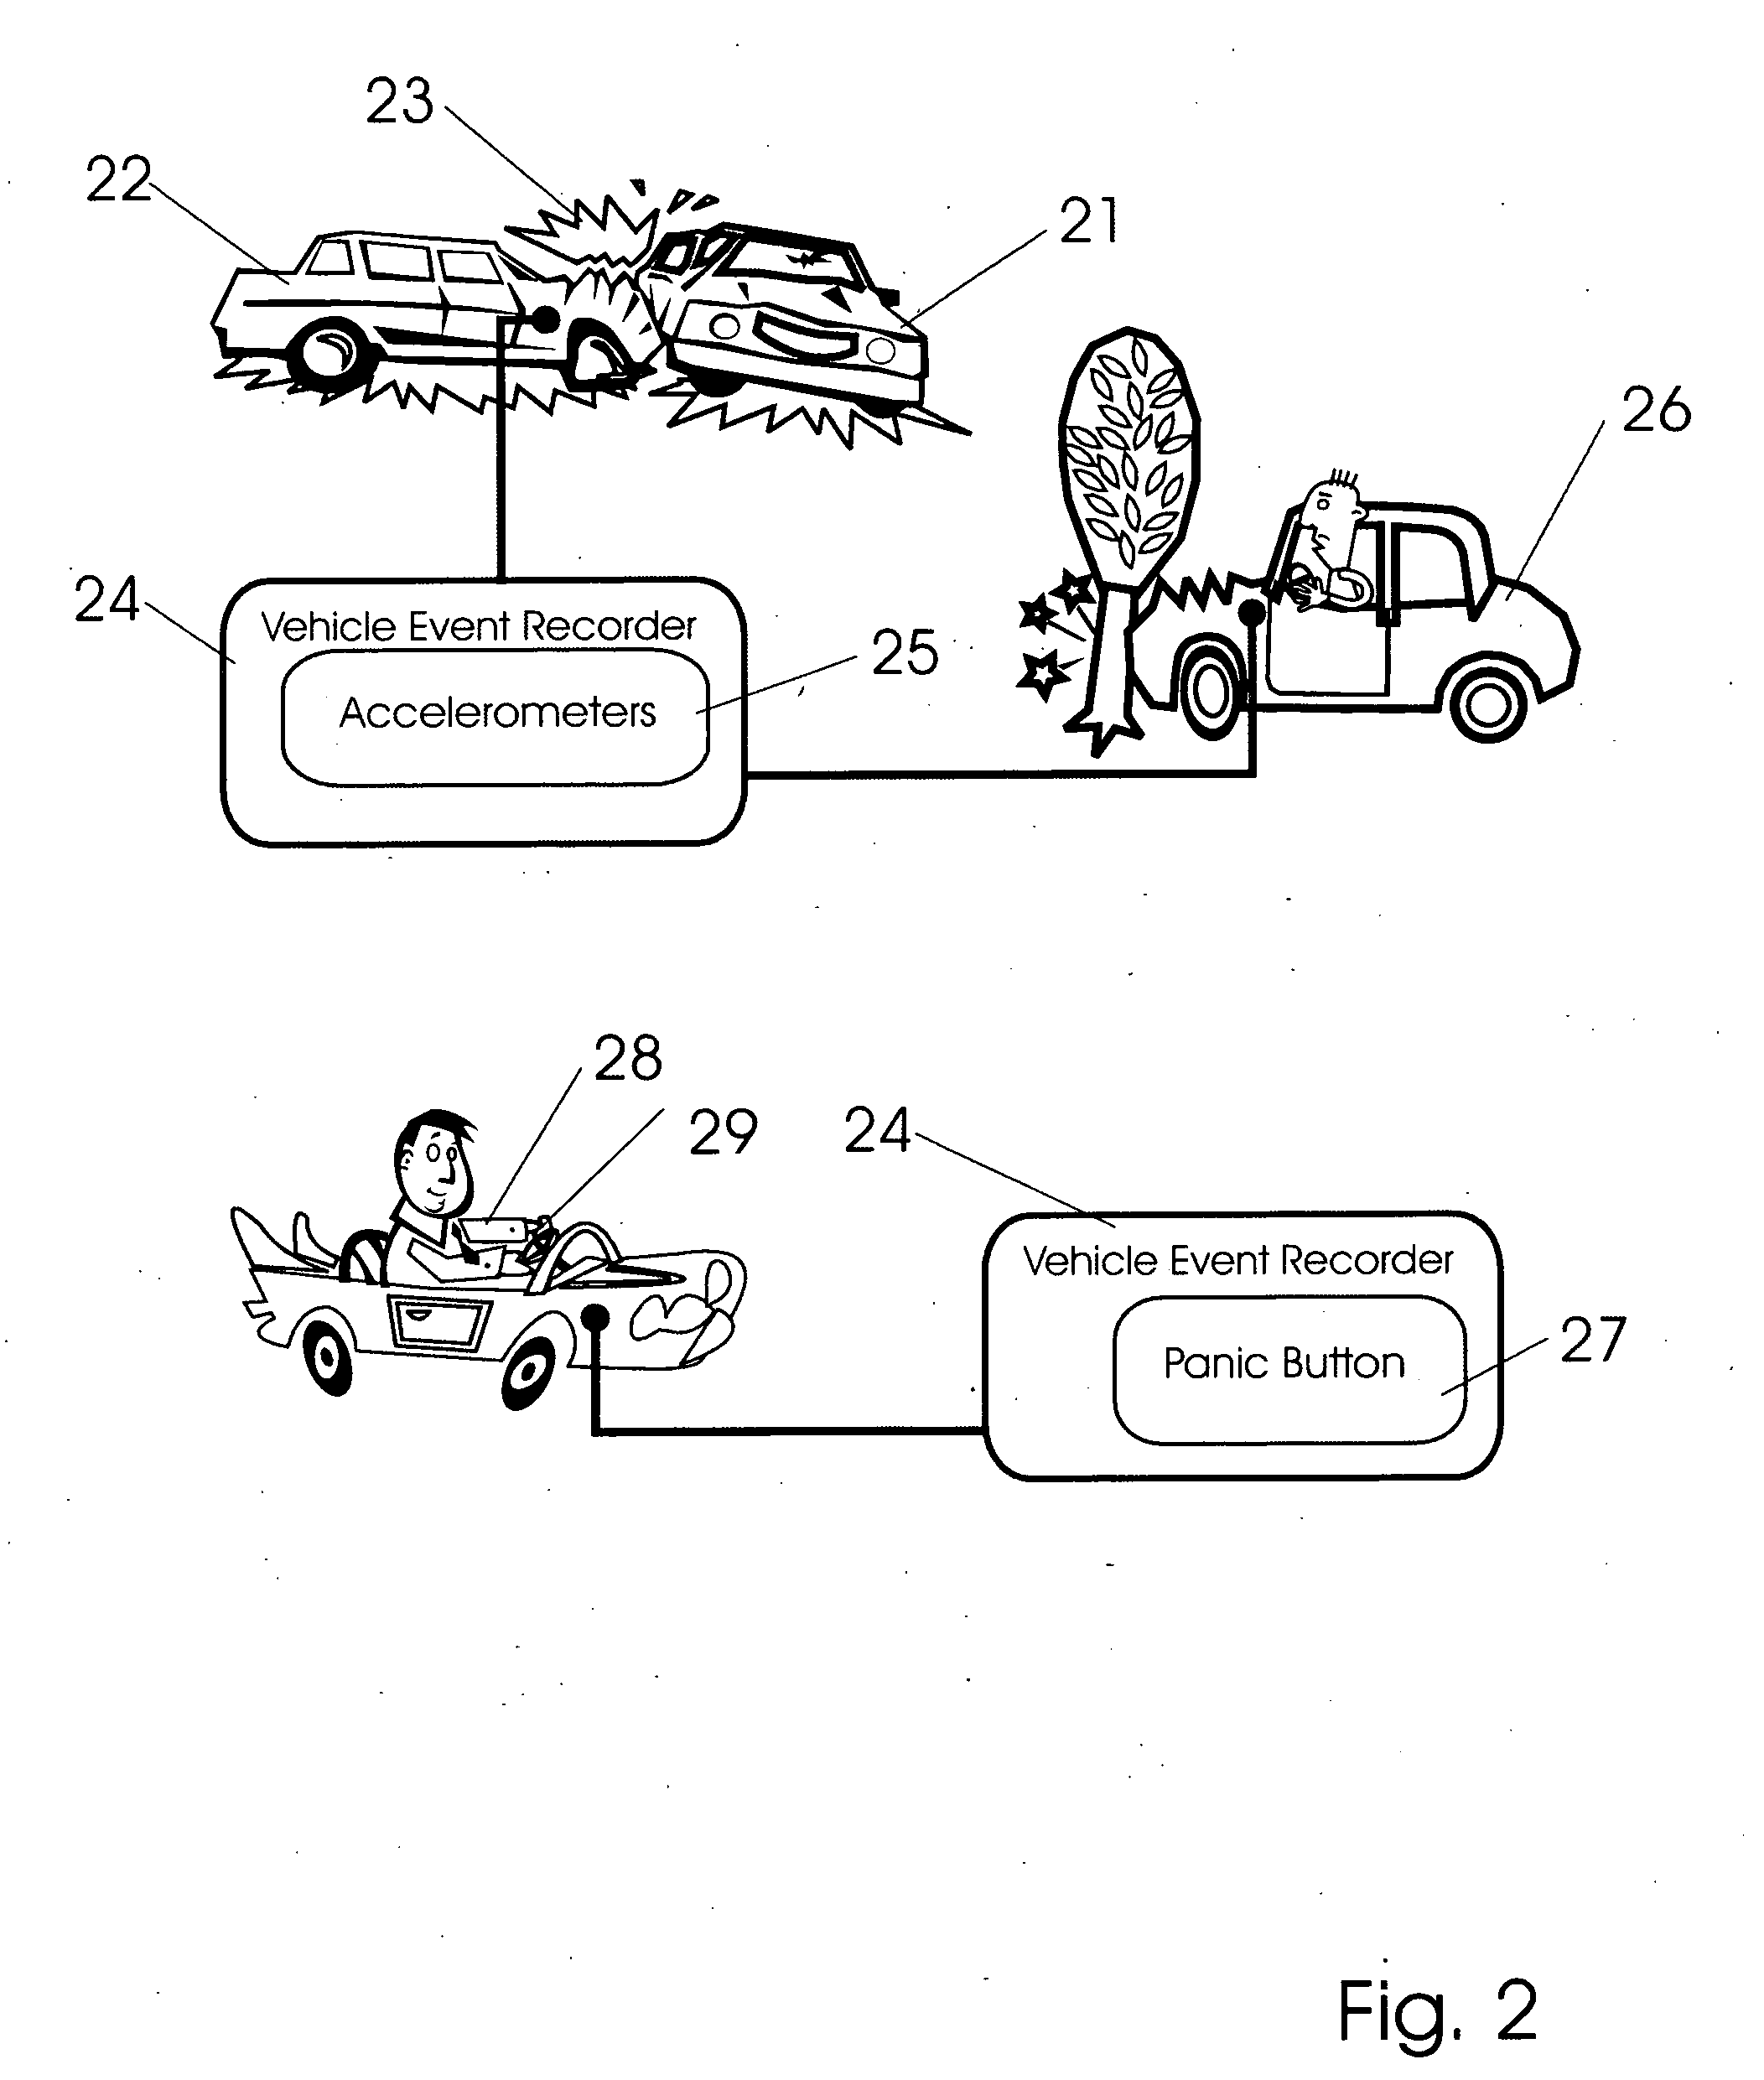 Multi-stage memory buffer and automatic transfers in vehicle event recording systems